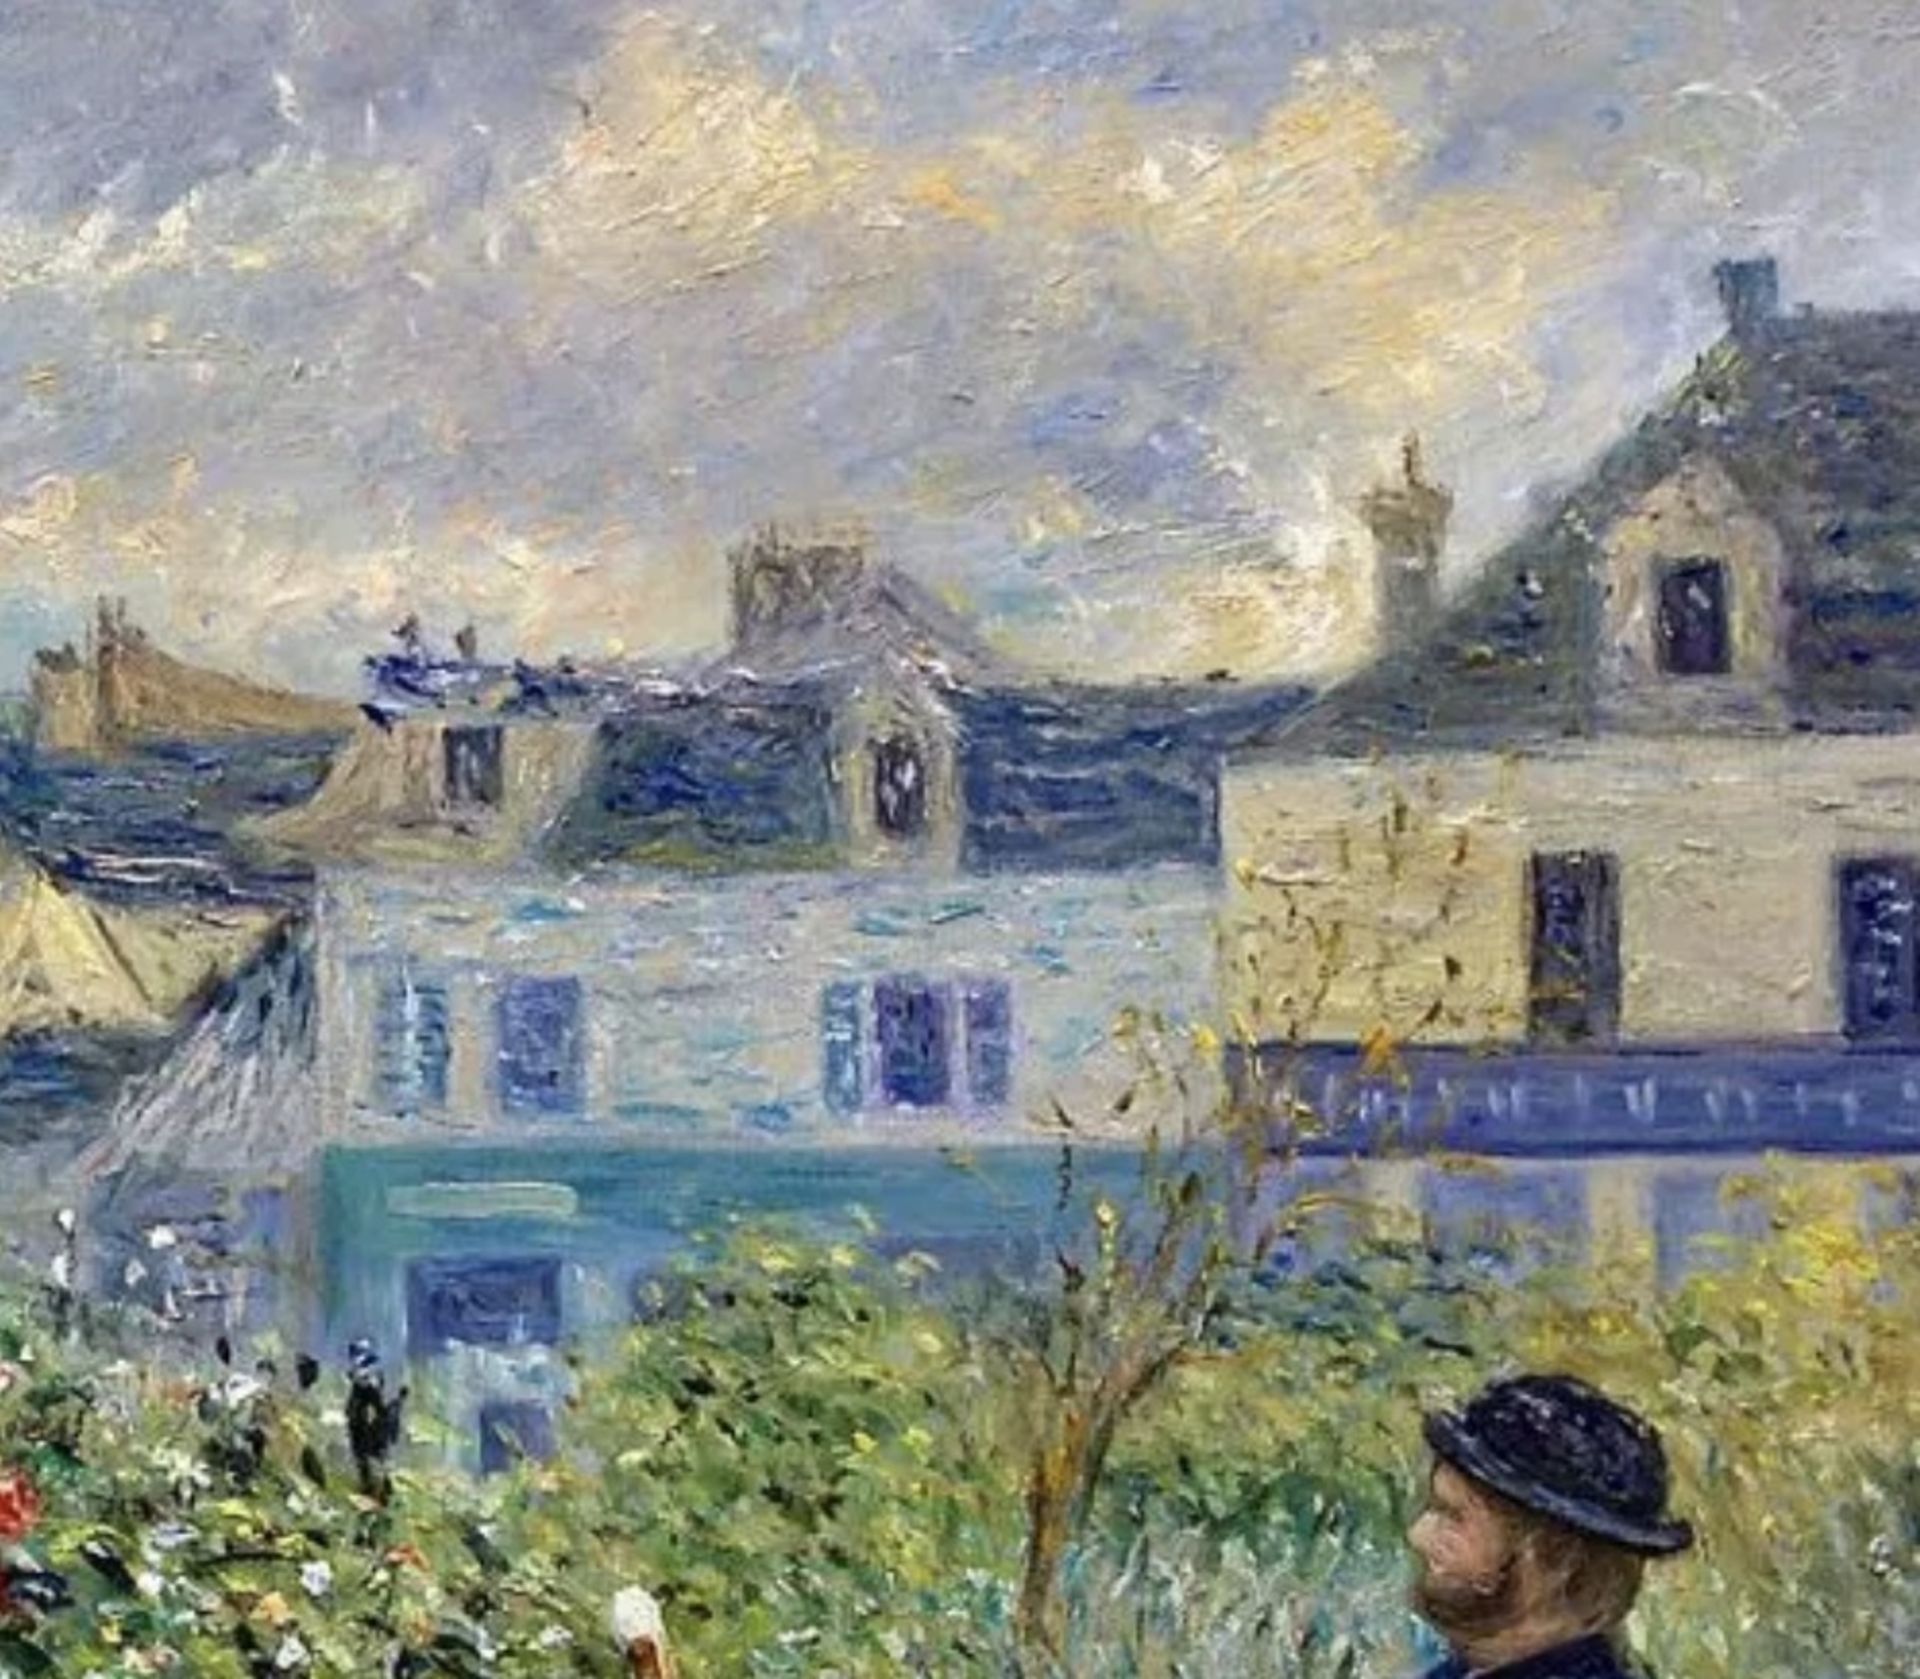 Pierre Auguste Renoir "Monet Painting in His Garden at Argenteuil, 1873" Oil Painting, After - Image 3 of 5